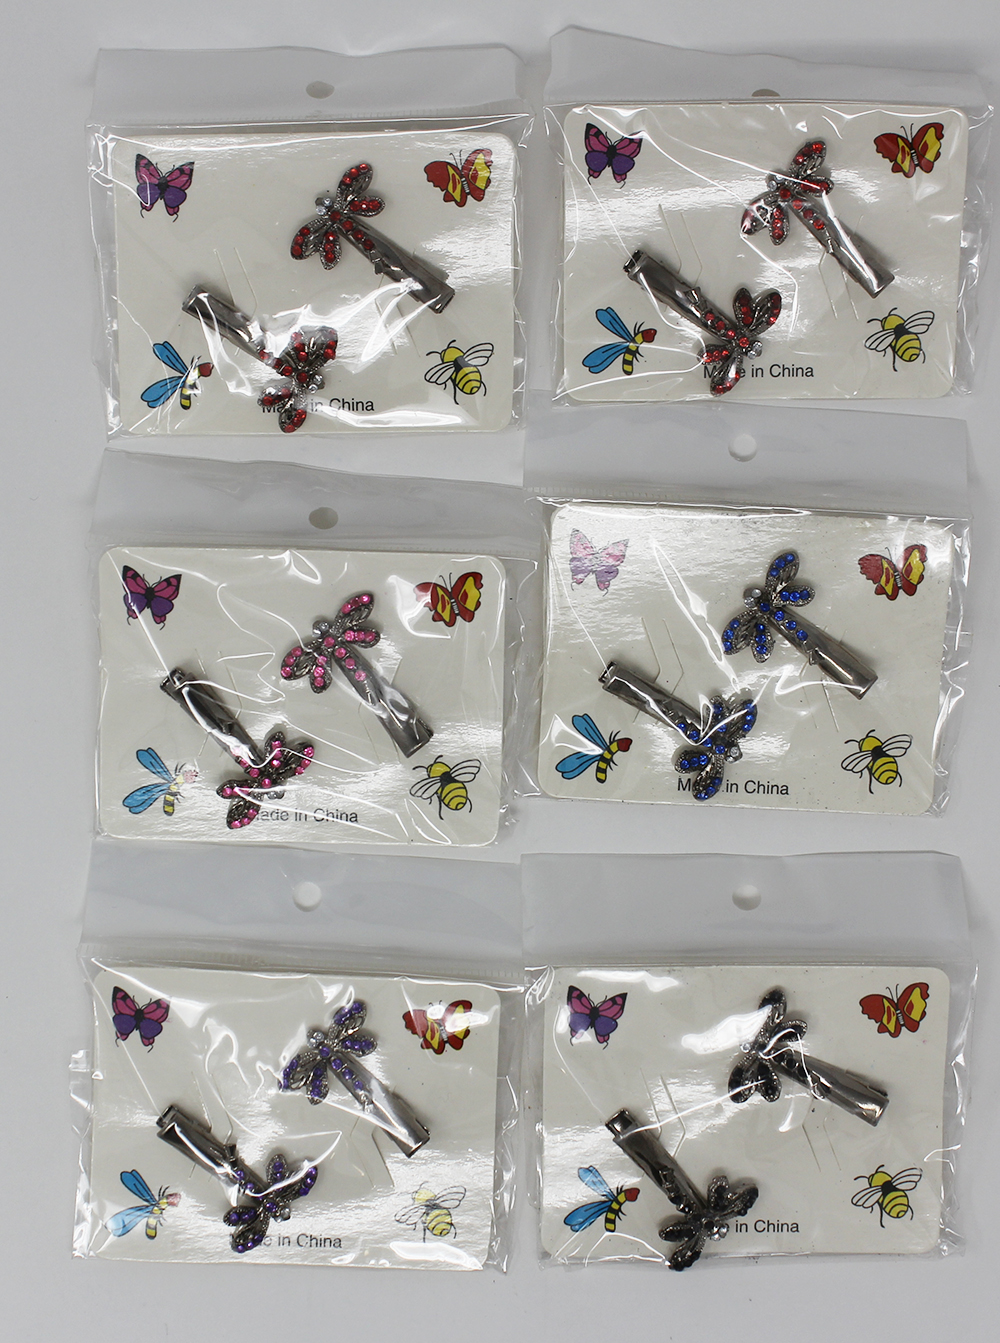 INSECTOPIA RHINESTONE DRAGONFLY SALON CLIPS, 2 COUNT PACK